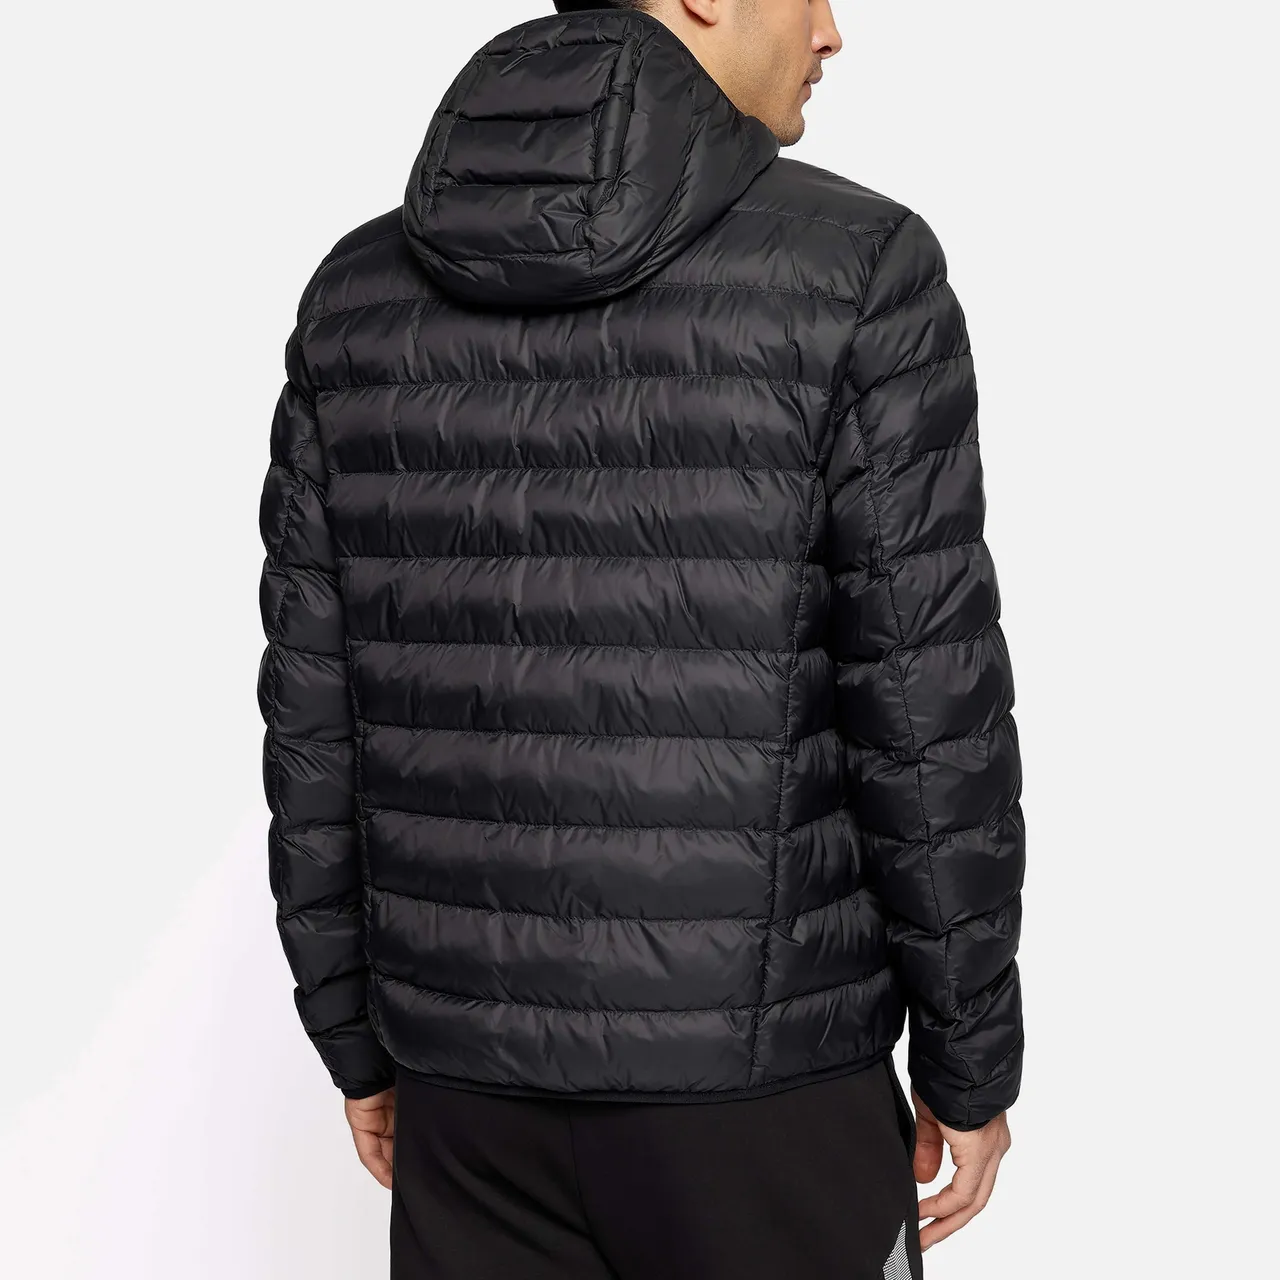 BOSS Green J_Thor Water-Repellent Padded Shell Hooded Jacket